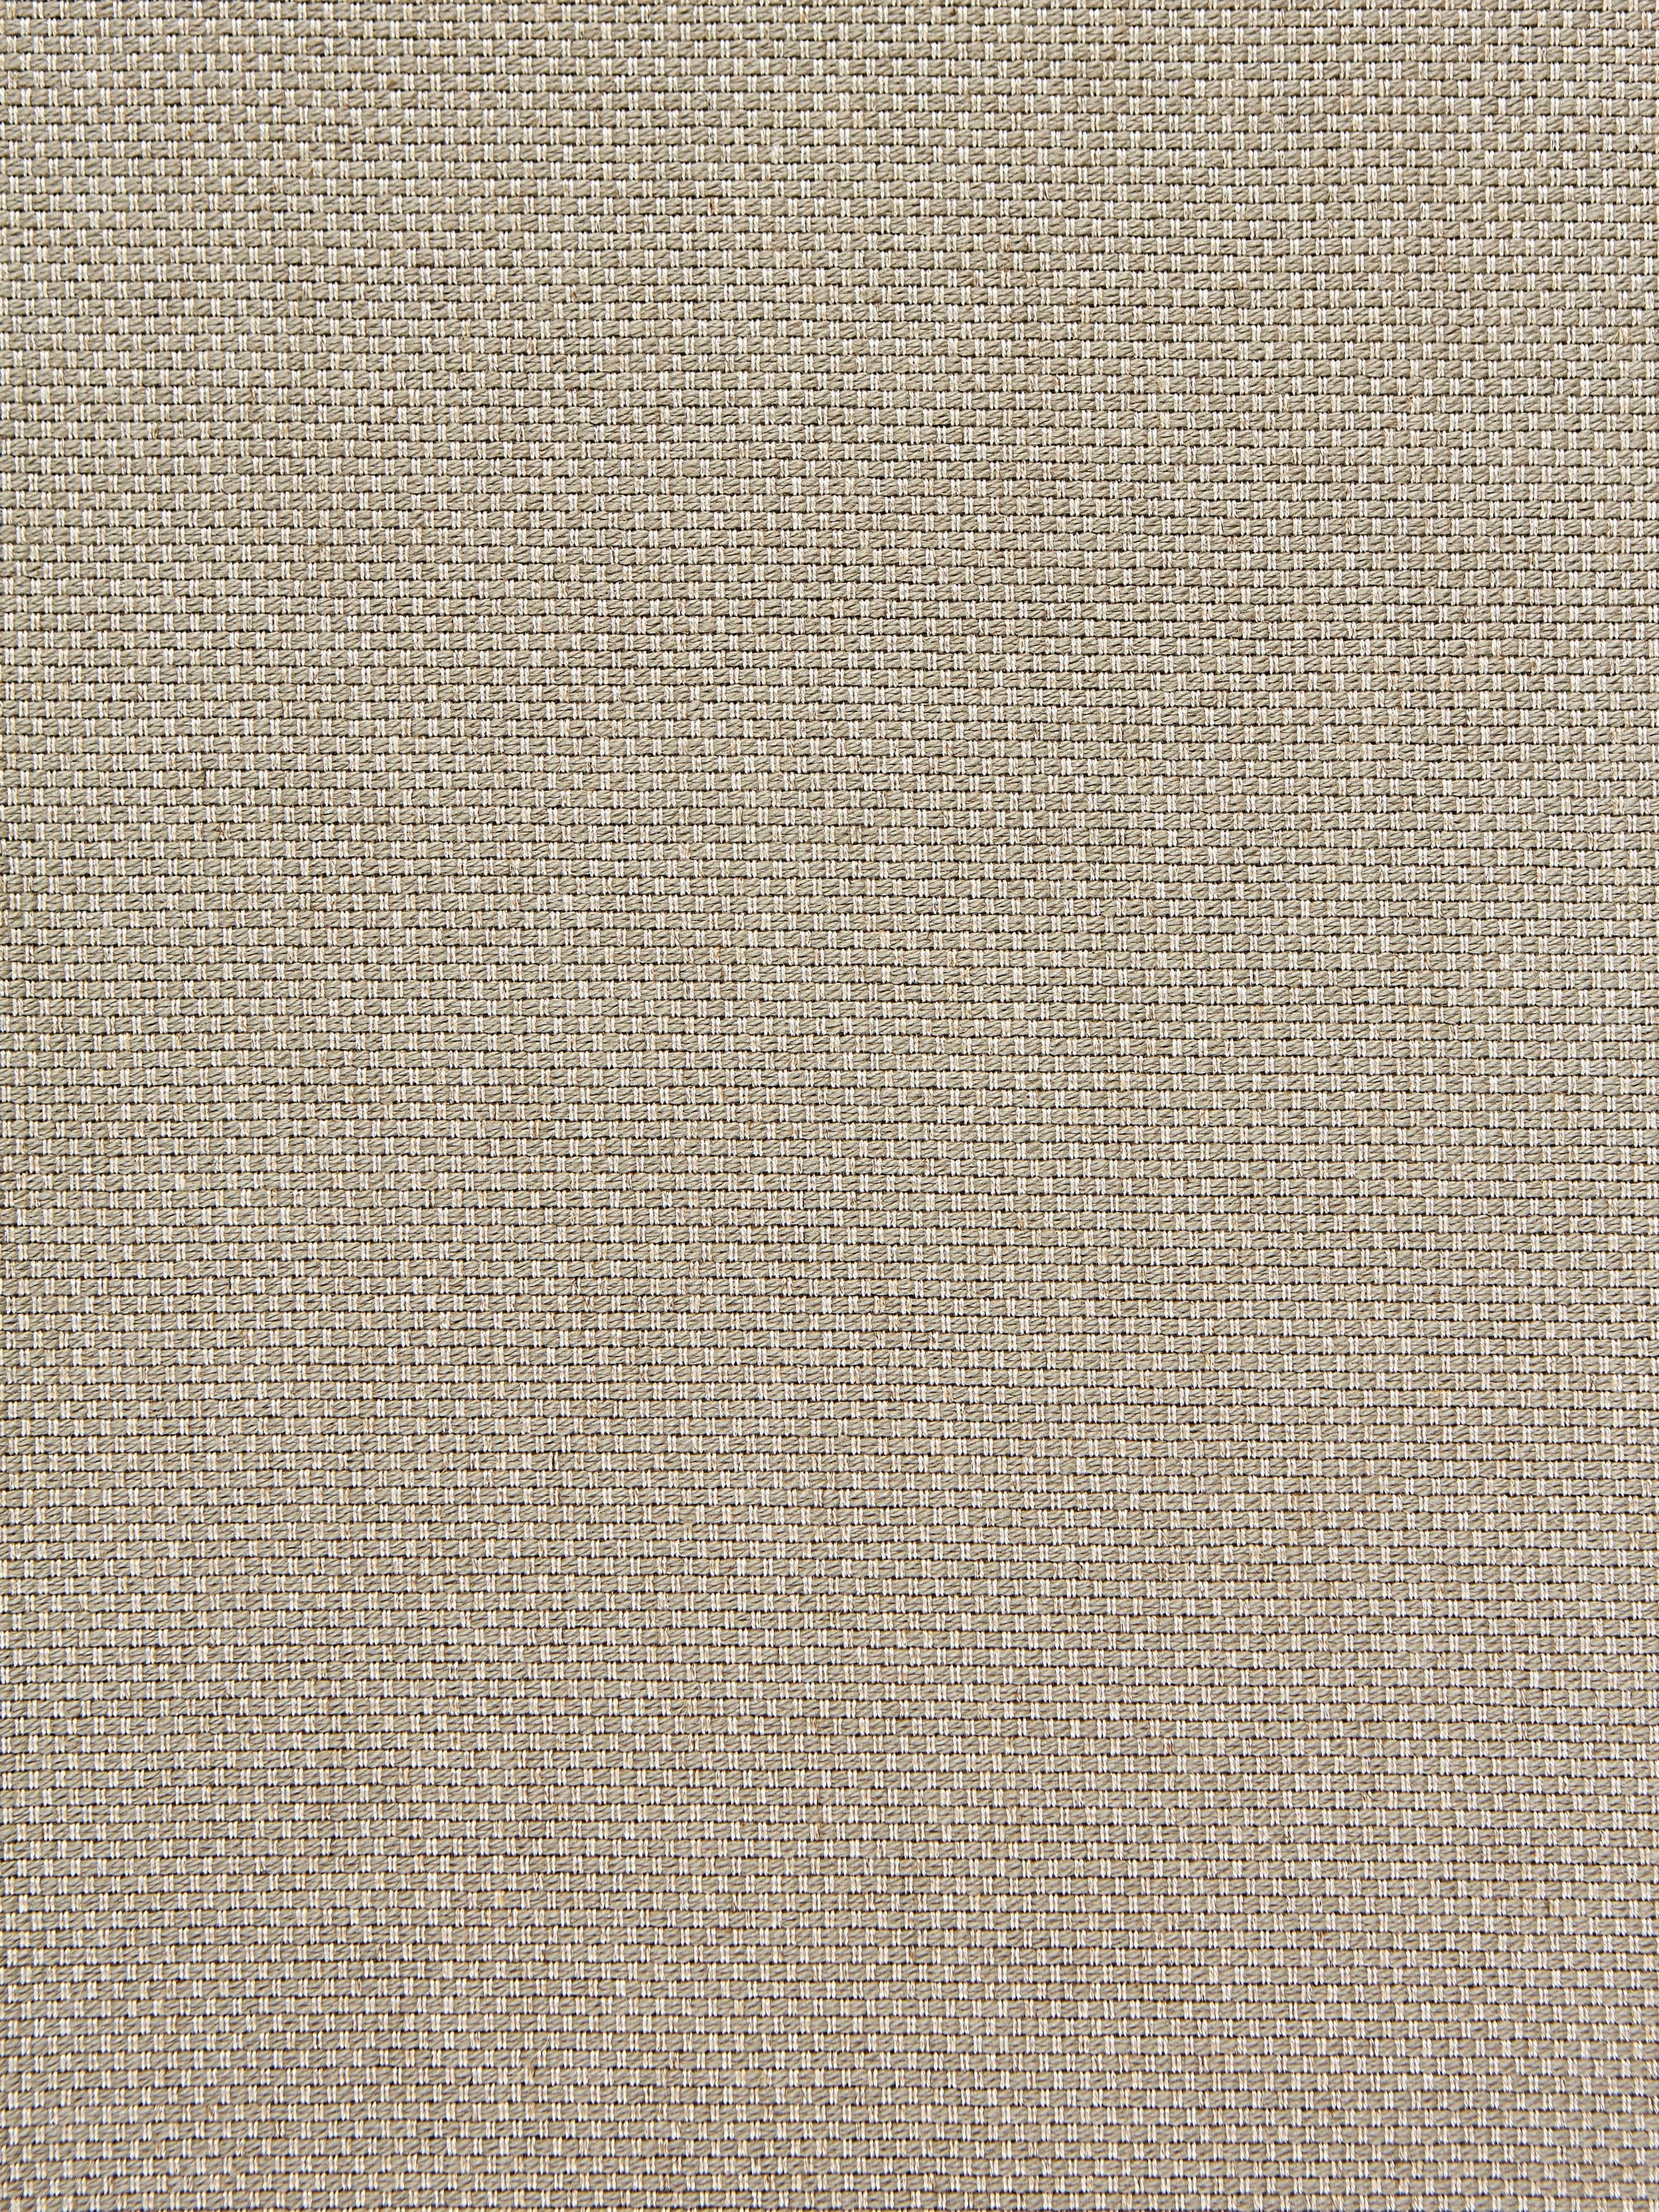 Prato Weave fabric in flax color - pattern number SC 000136393 - by Scalamandre in the Scalamandre Fabrics Book 1 collection